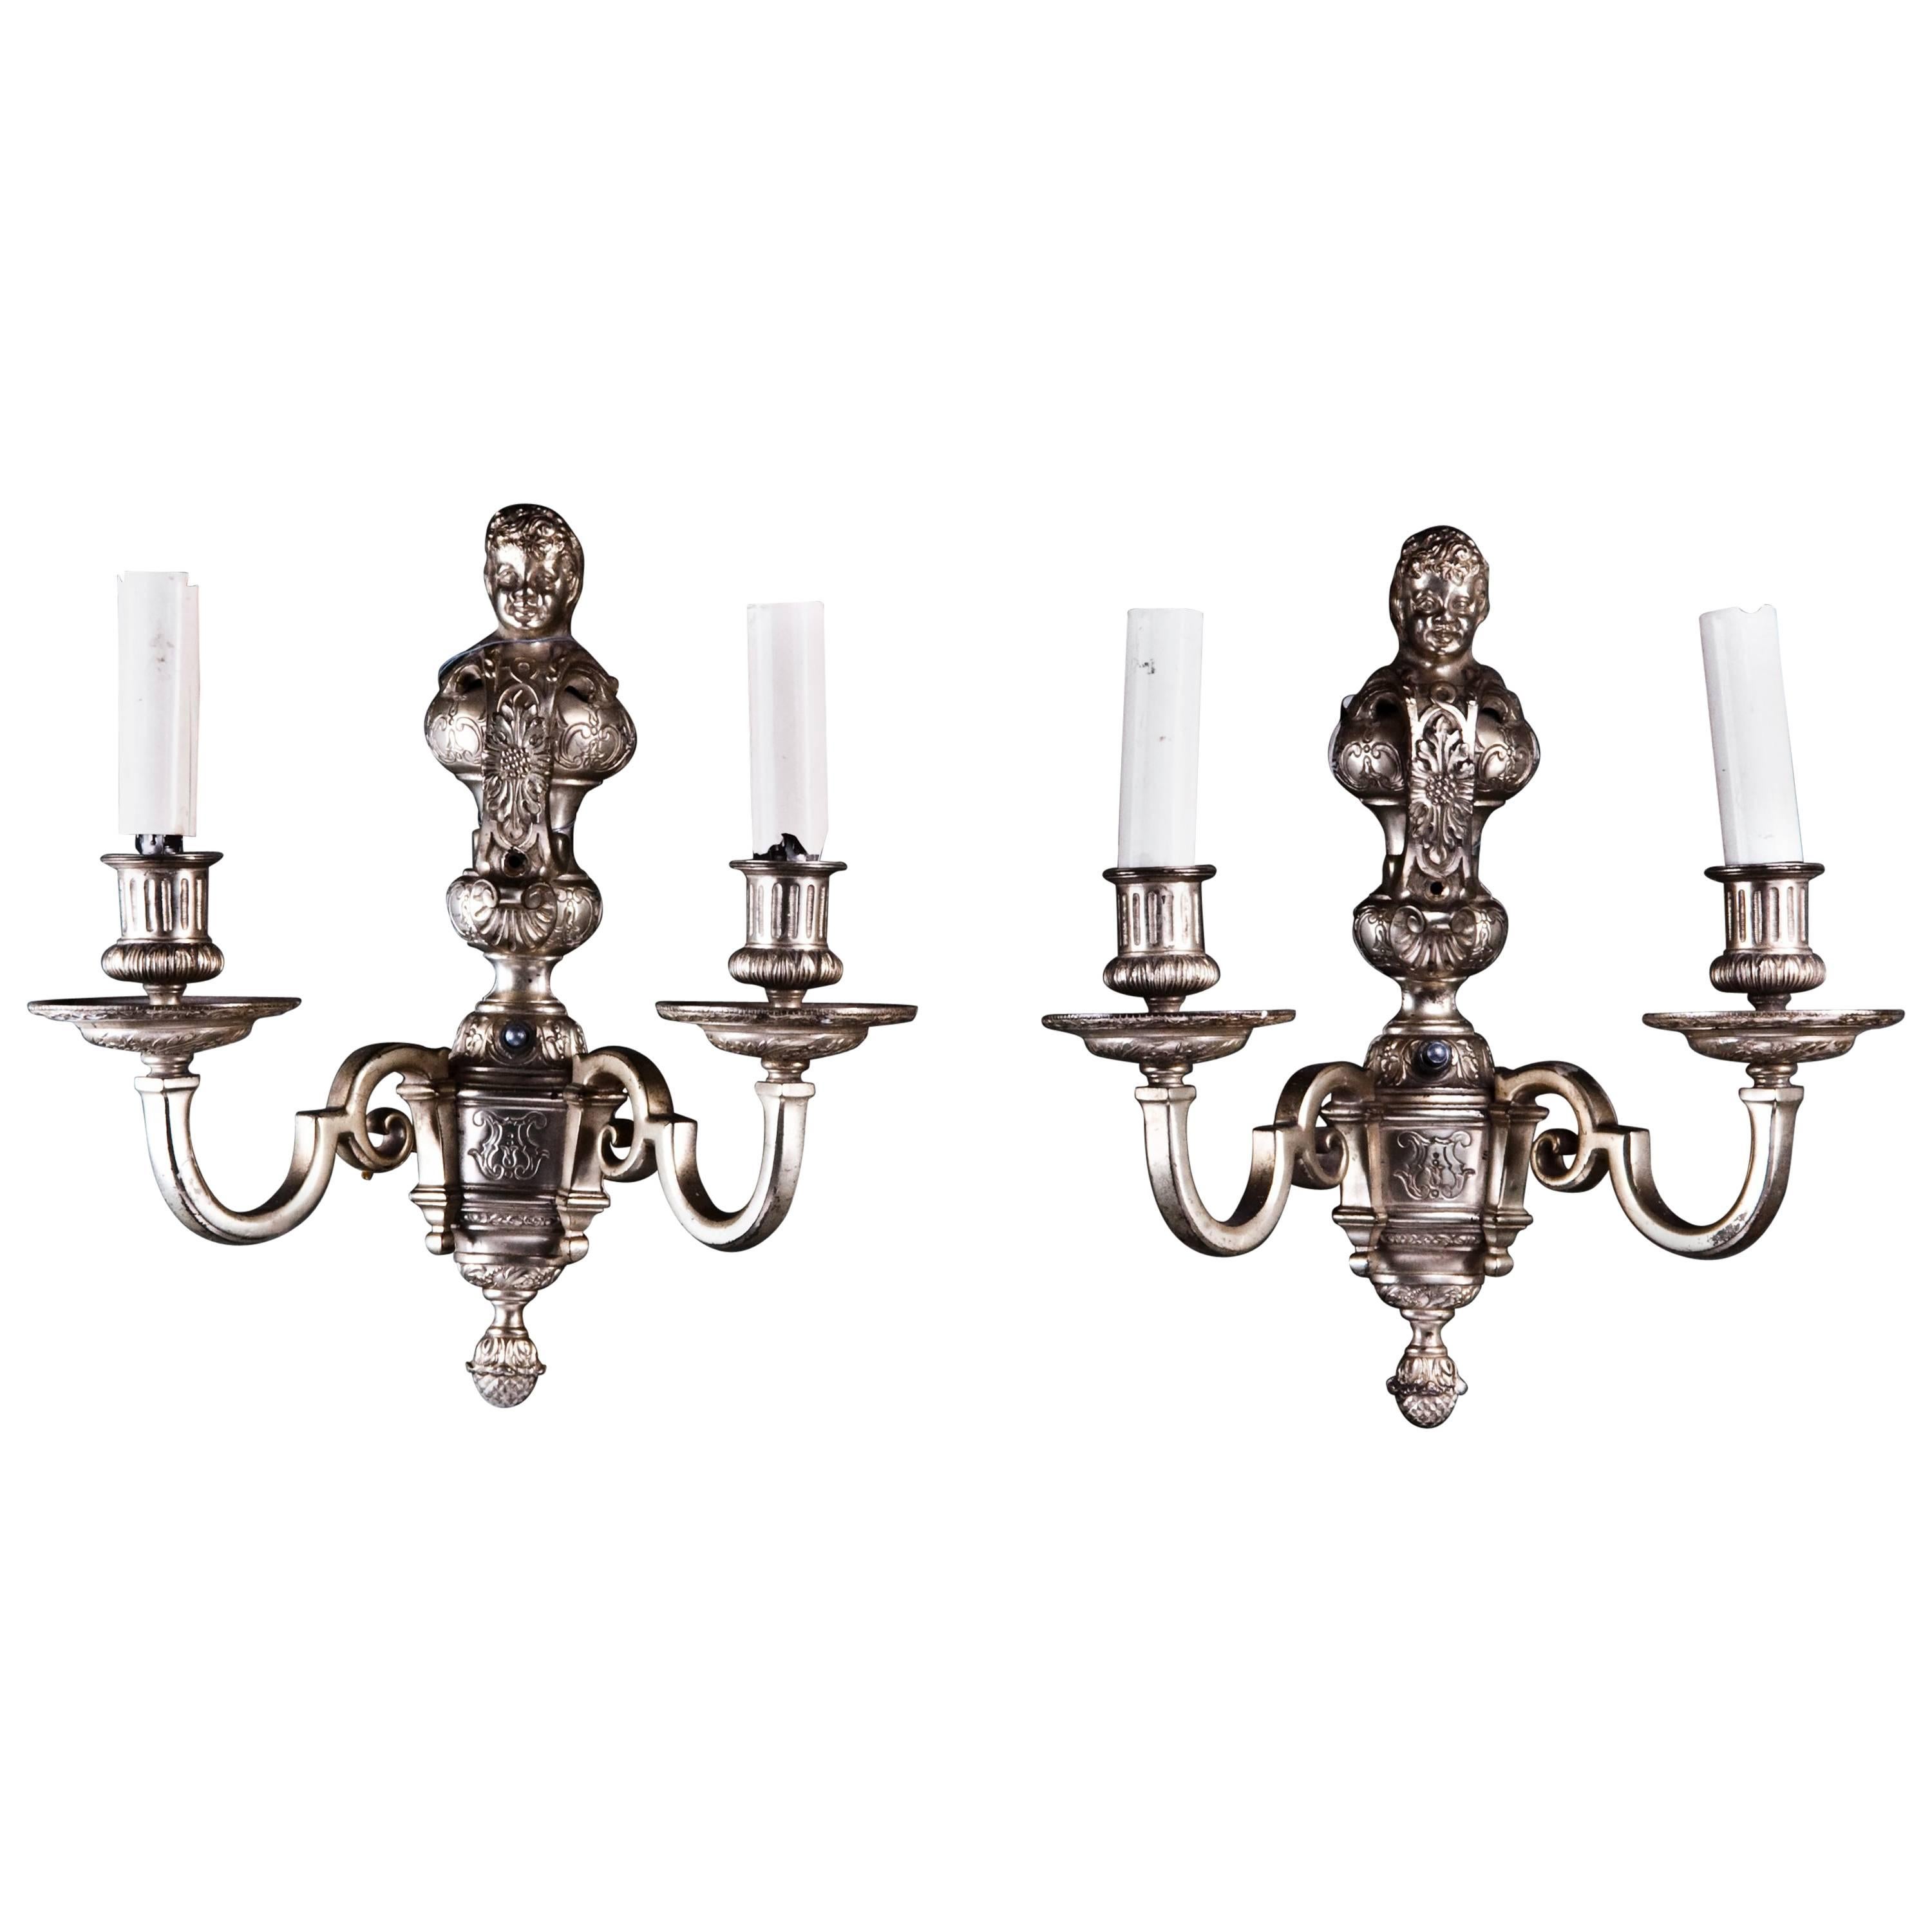 Pair of American Louis XVI Style Silvered Sconces Attributed to E.F. Caldwell